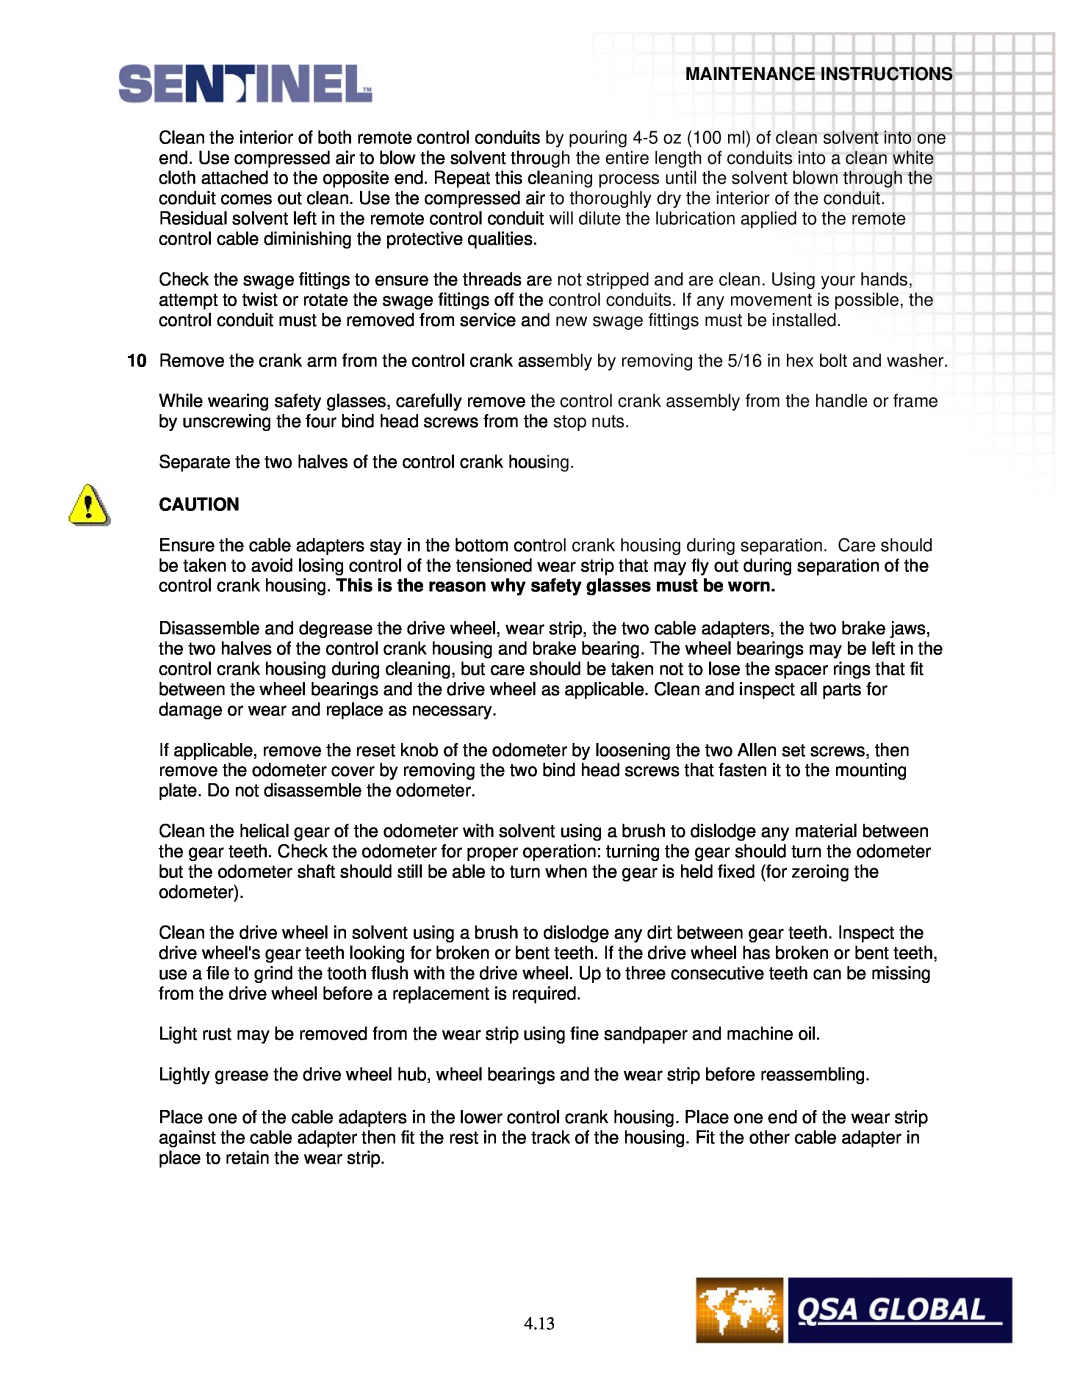 Sigma projetor manual Maintenance Instructions, Separate the two halves of the control crank housing 